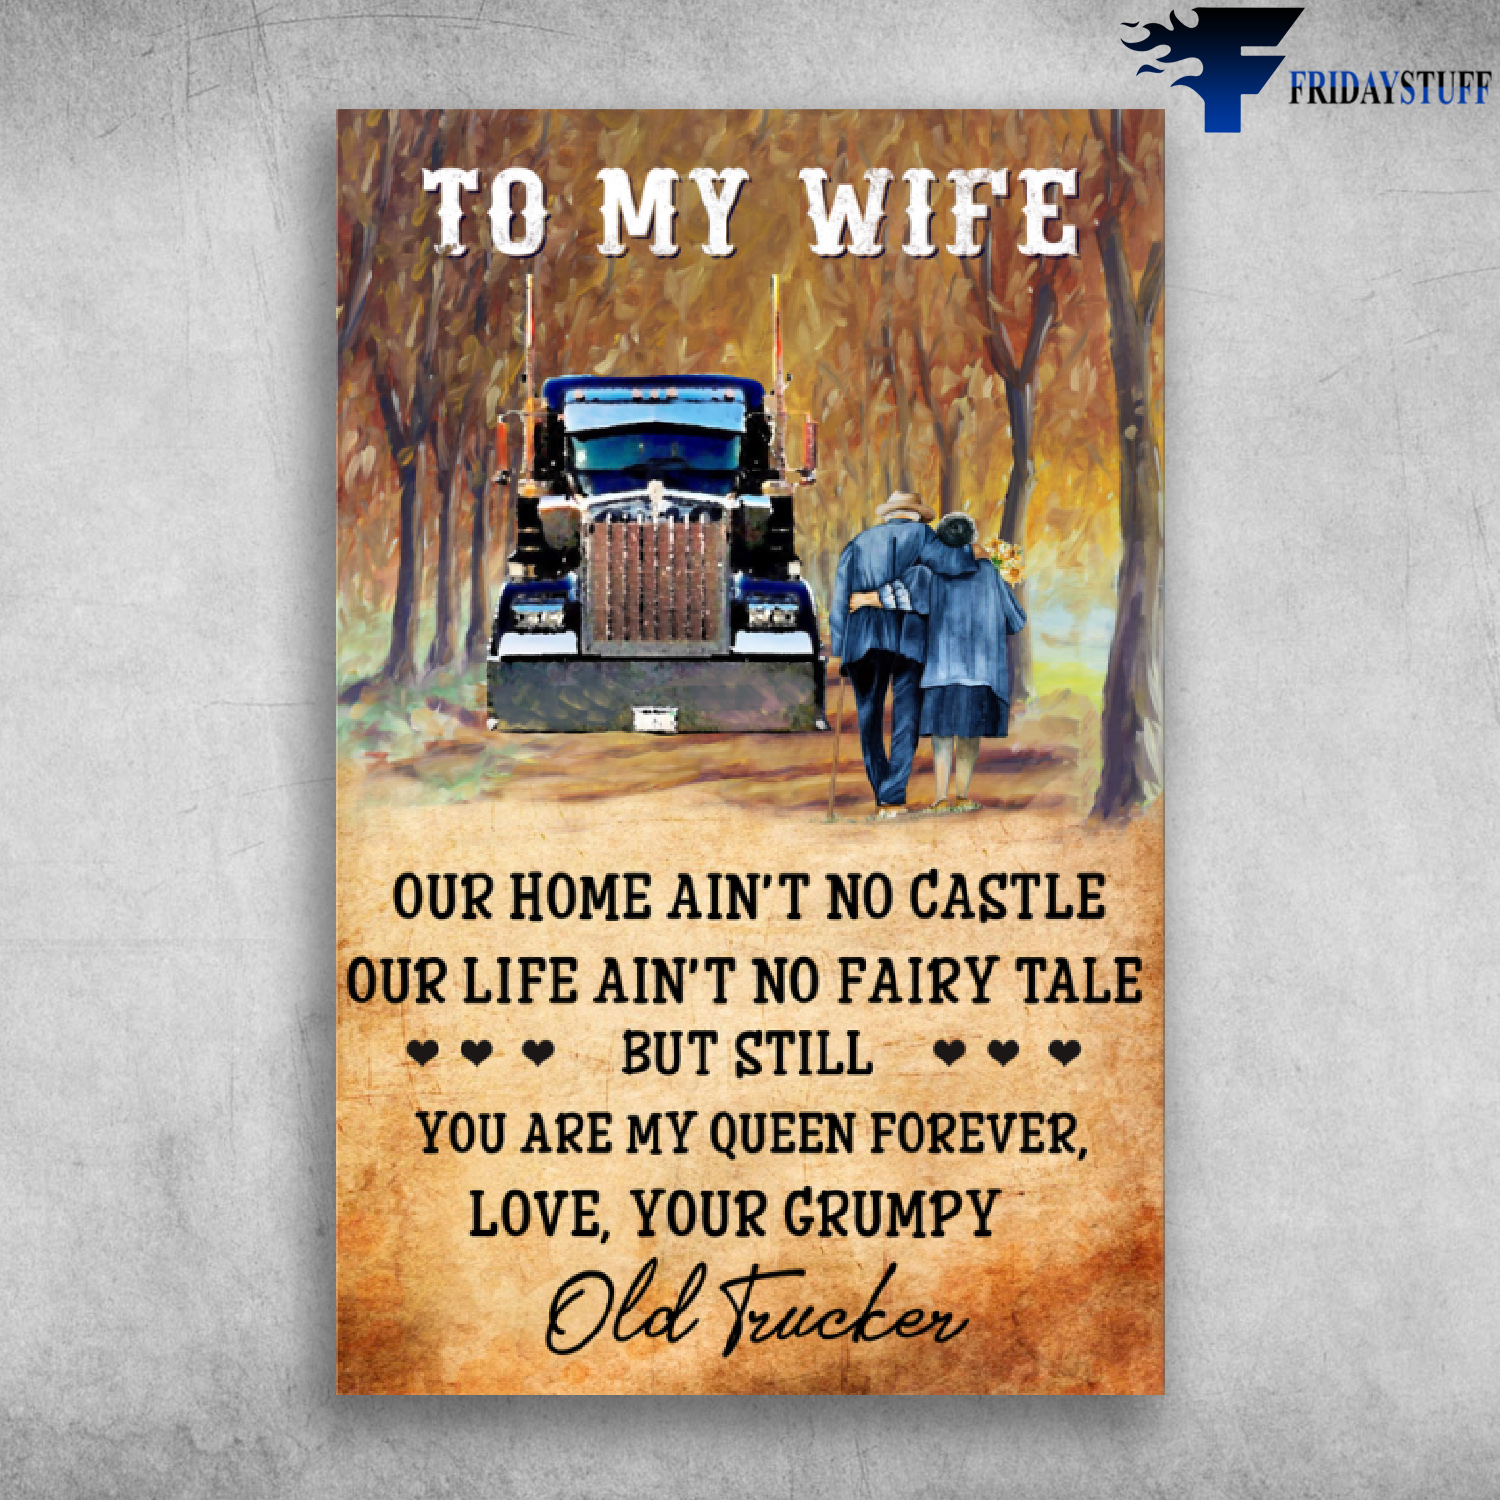 To My Wife Our Home Ain't No Castle - Old Trucker